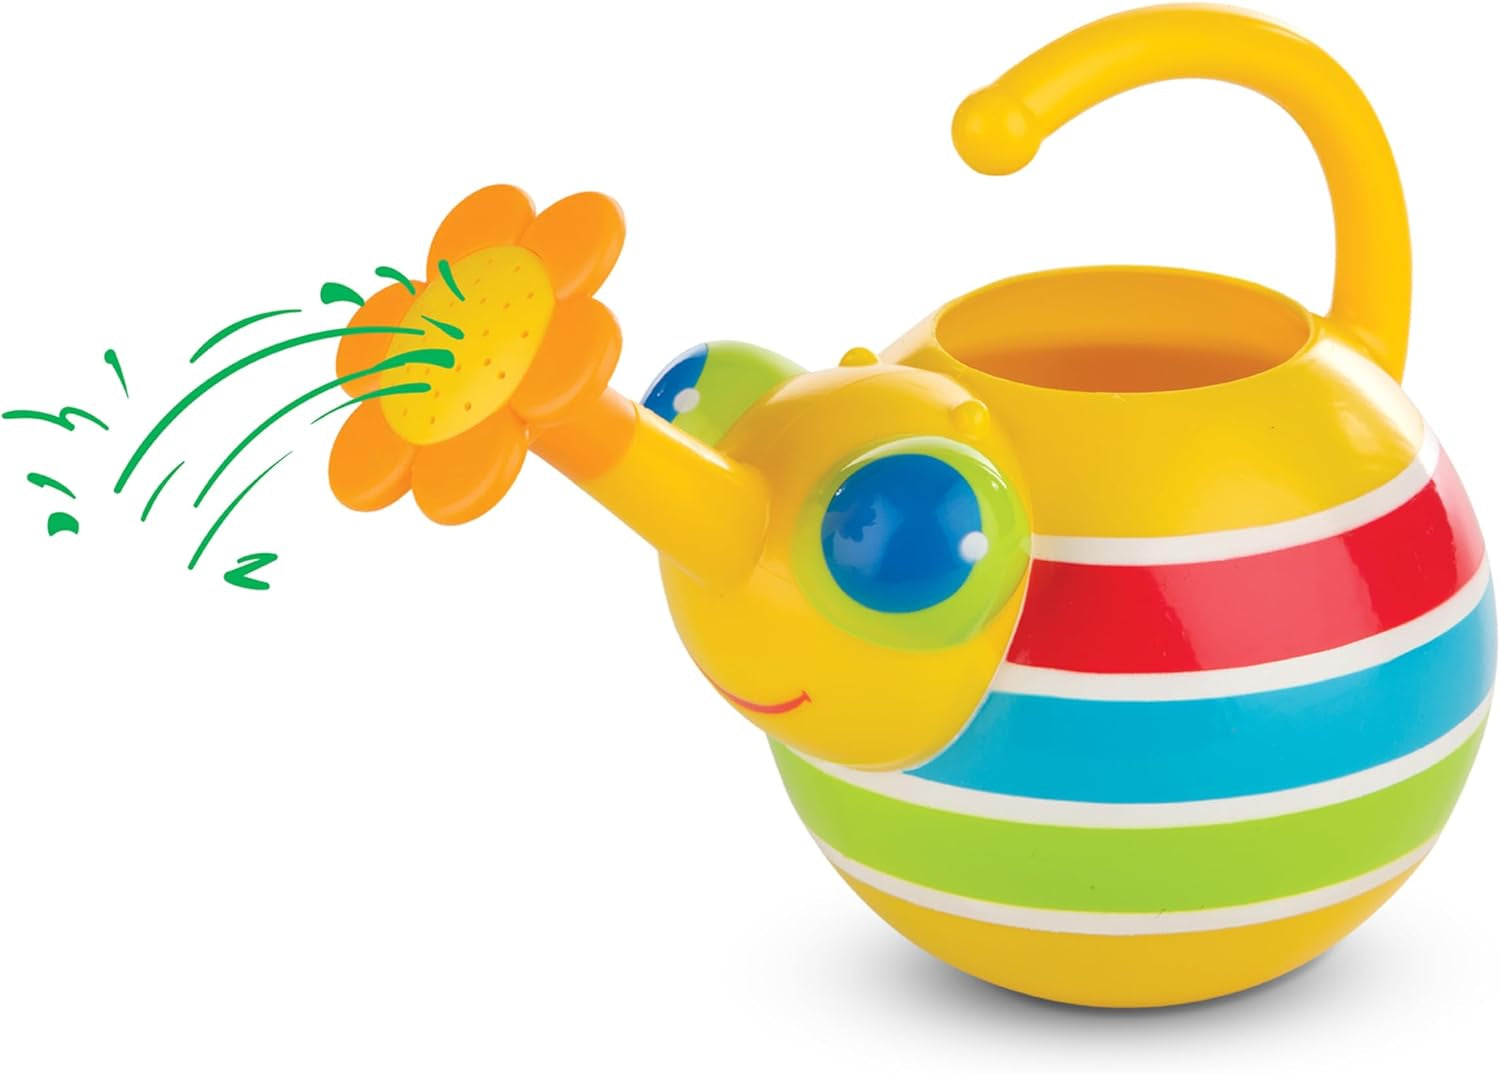 Sunny Patch Giddy Buggy Watering Can with Flower-Shaped Spout - Kid-Friendly Garden-Themed Pretend Play Watering Can for Kids